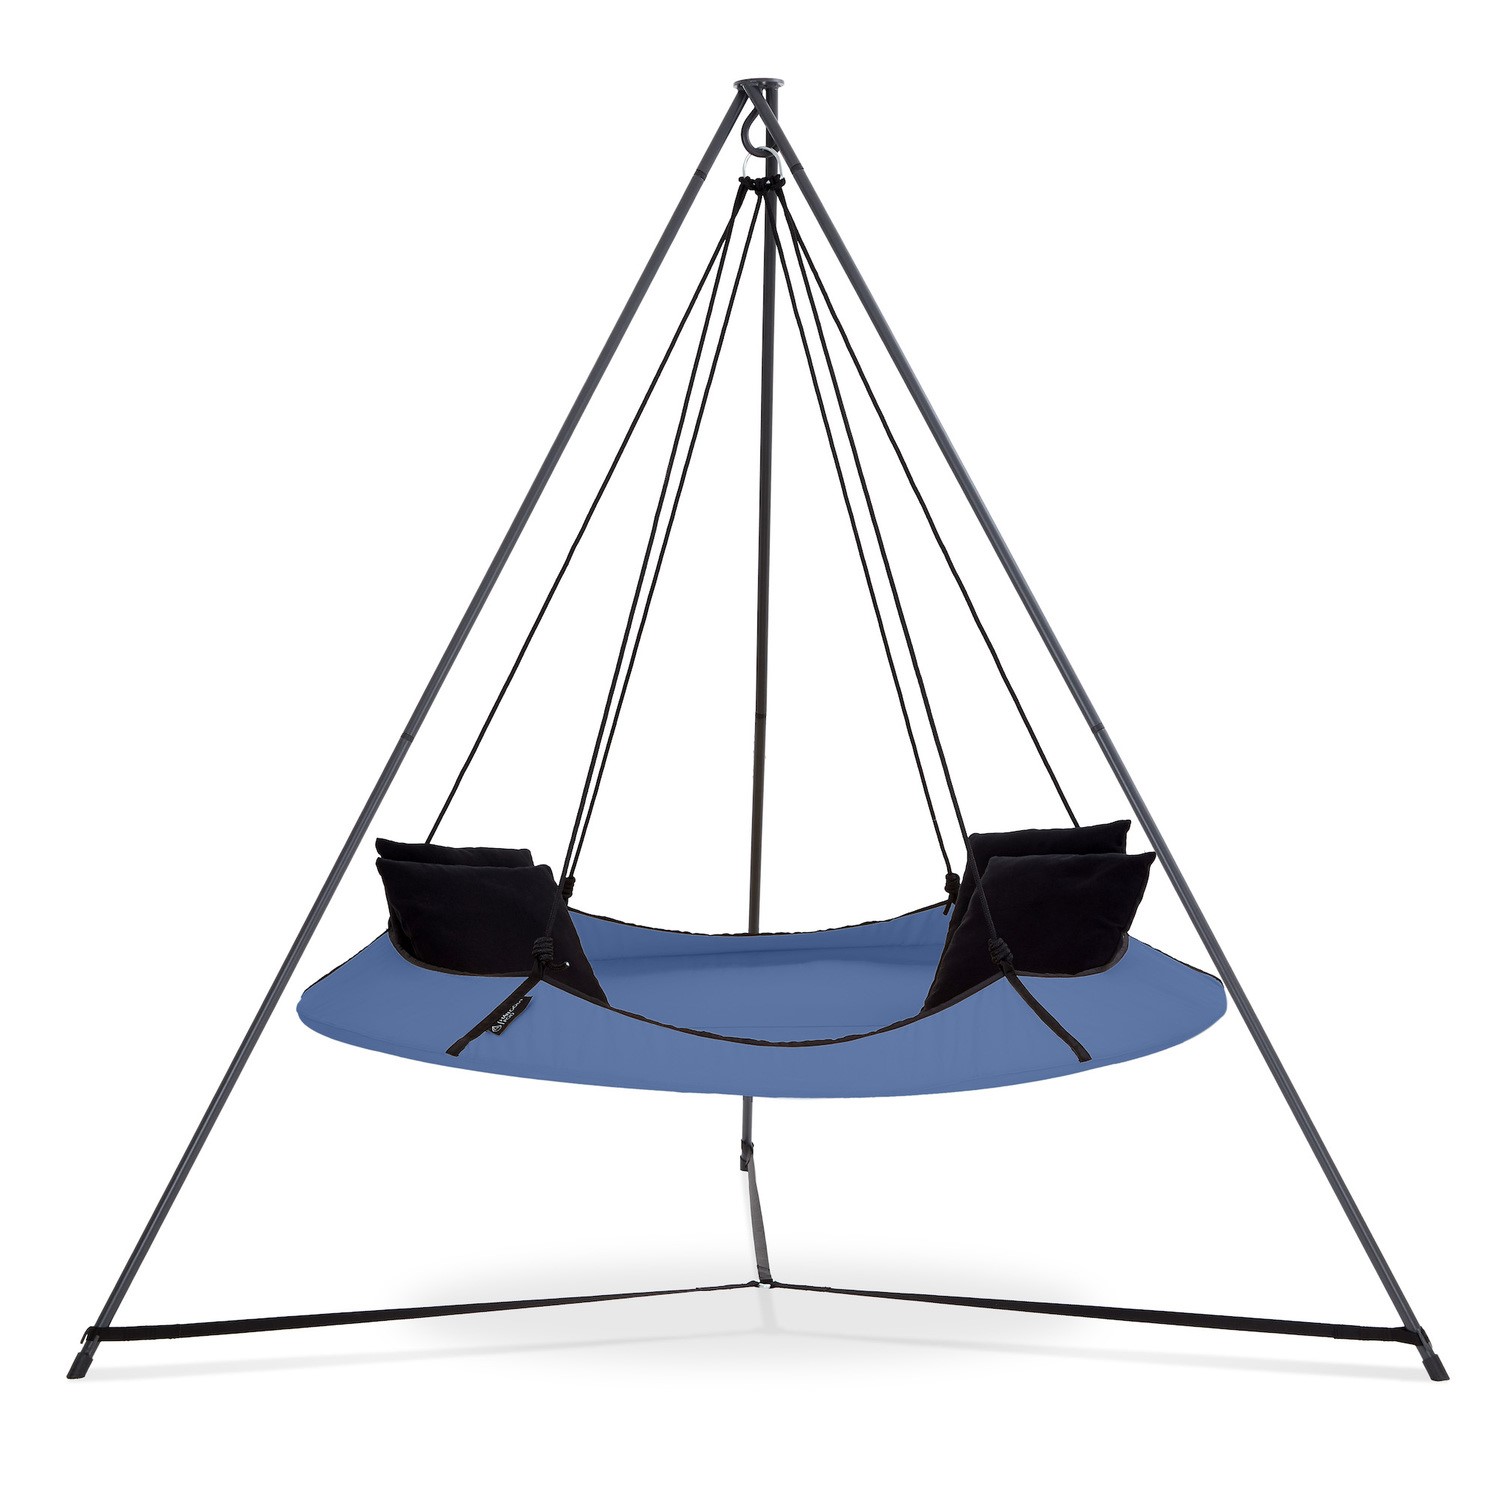 Read more about Hangout pod ink blue & black circular hammock bed with stand